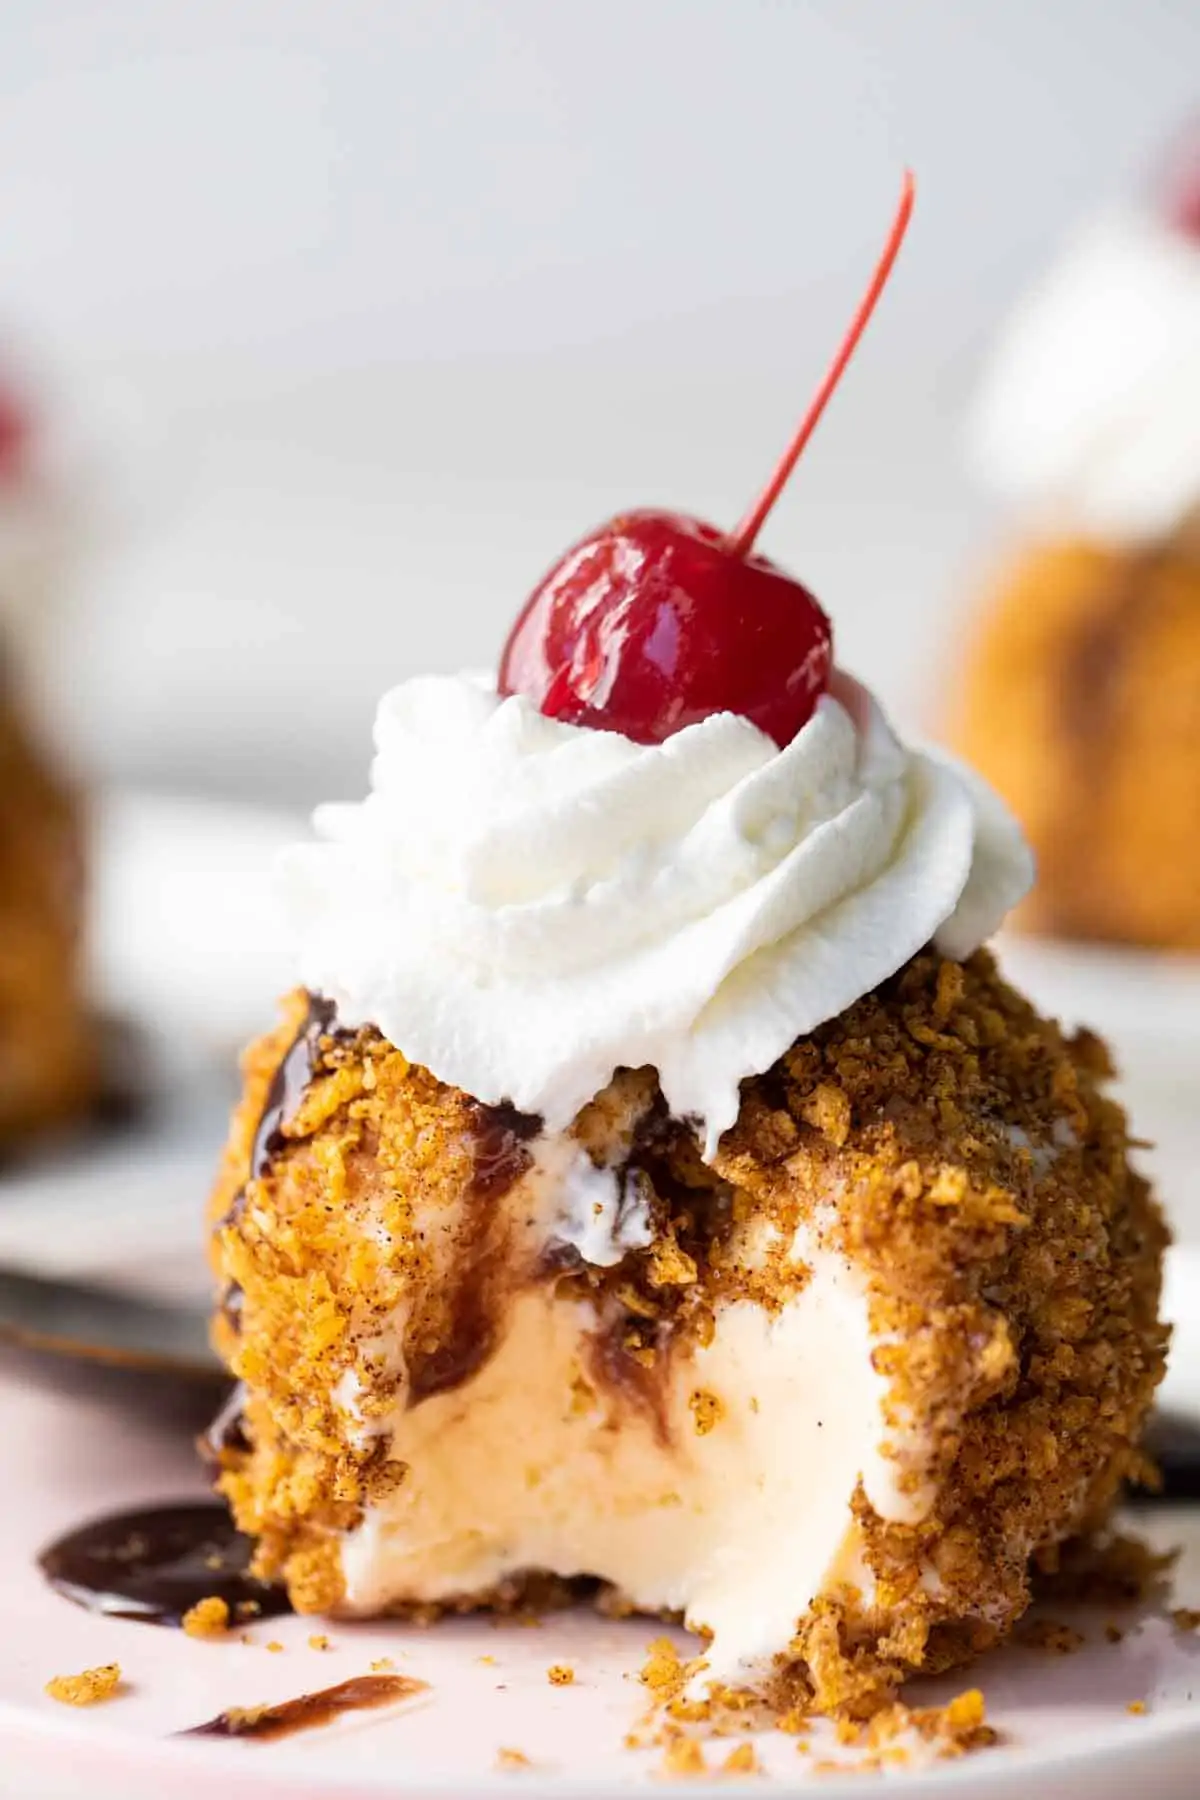 Mexican Fried Ice Cream topped with whipped cream and a cherry with a bite taken out on a plate.